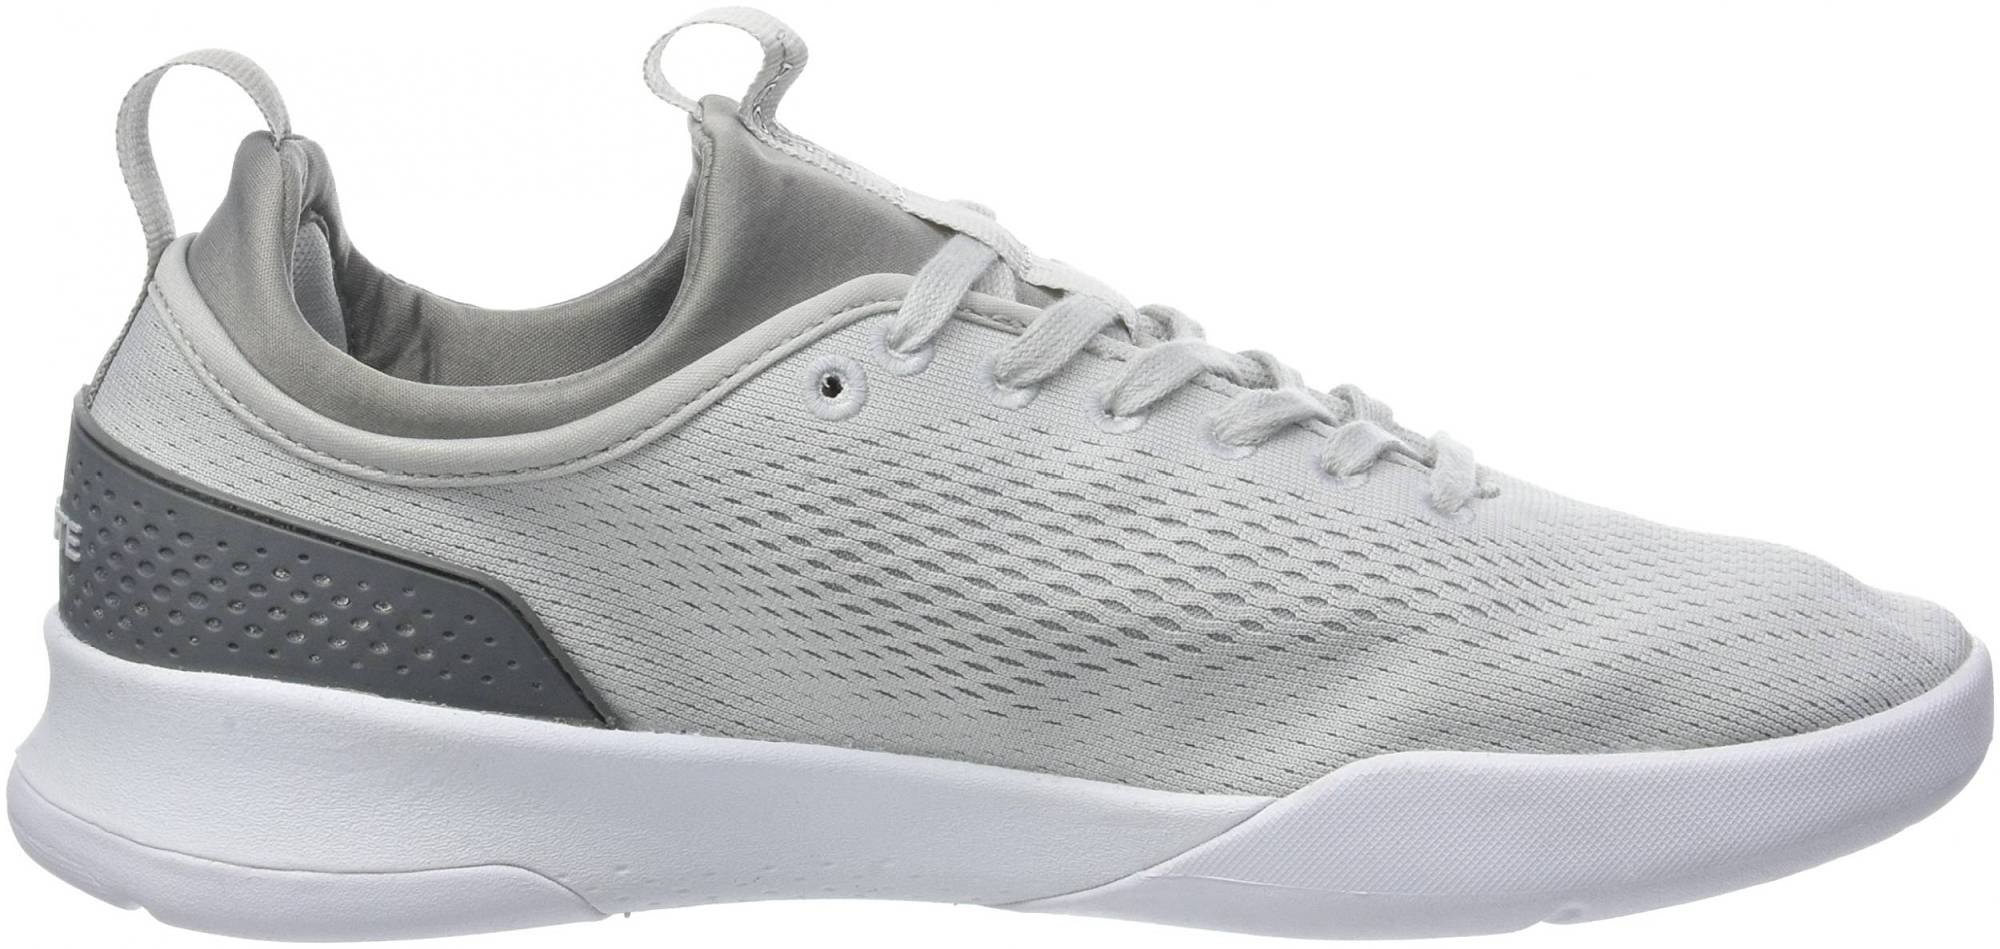 Lacoste LT Spirit 2.0 – Shoes Reviews & Reasons To Buy